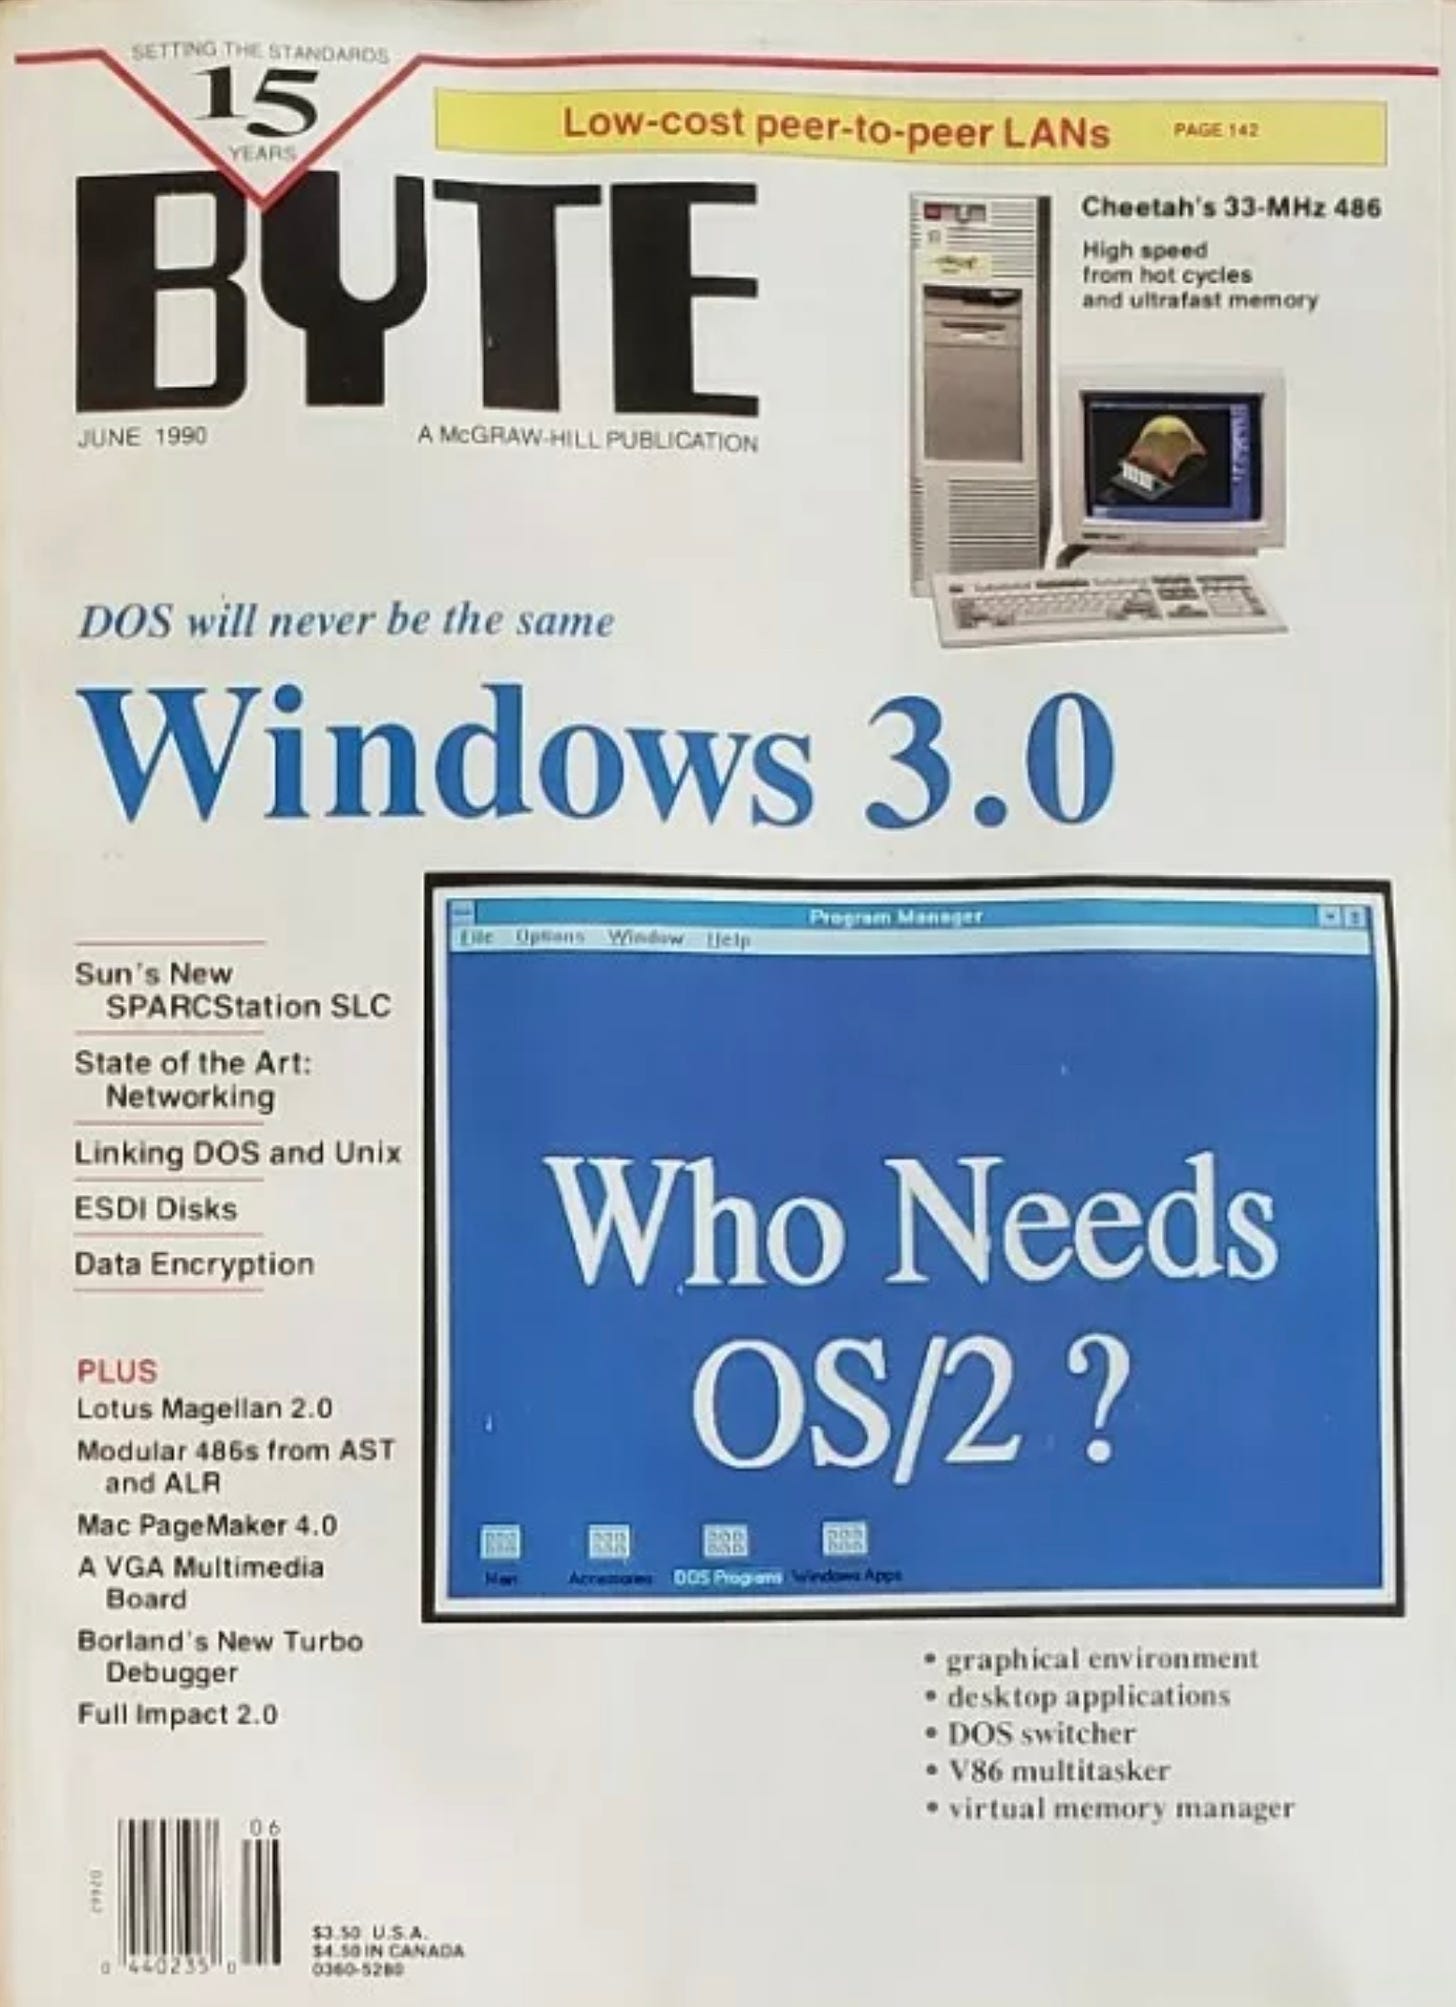 BYTE Magazine cover from June 1990 "DOS will never be the same: Windows 3.0" with a screen saying "Who needs OS/2?"